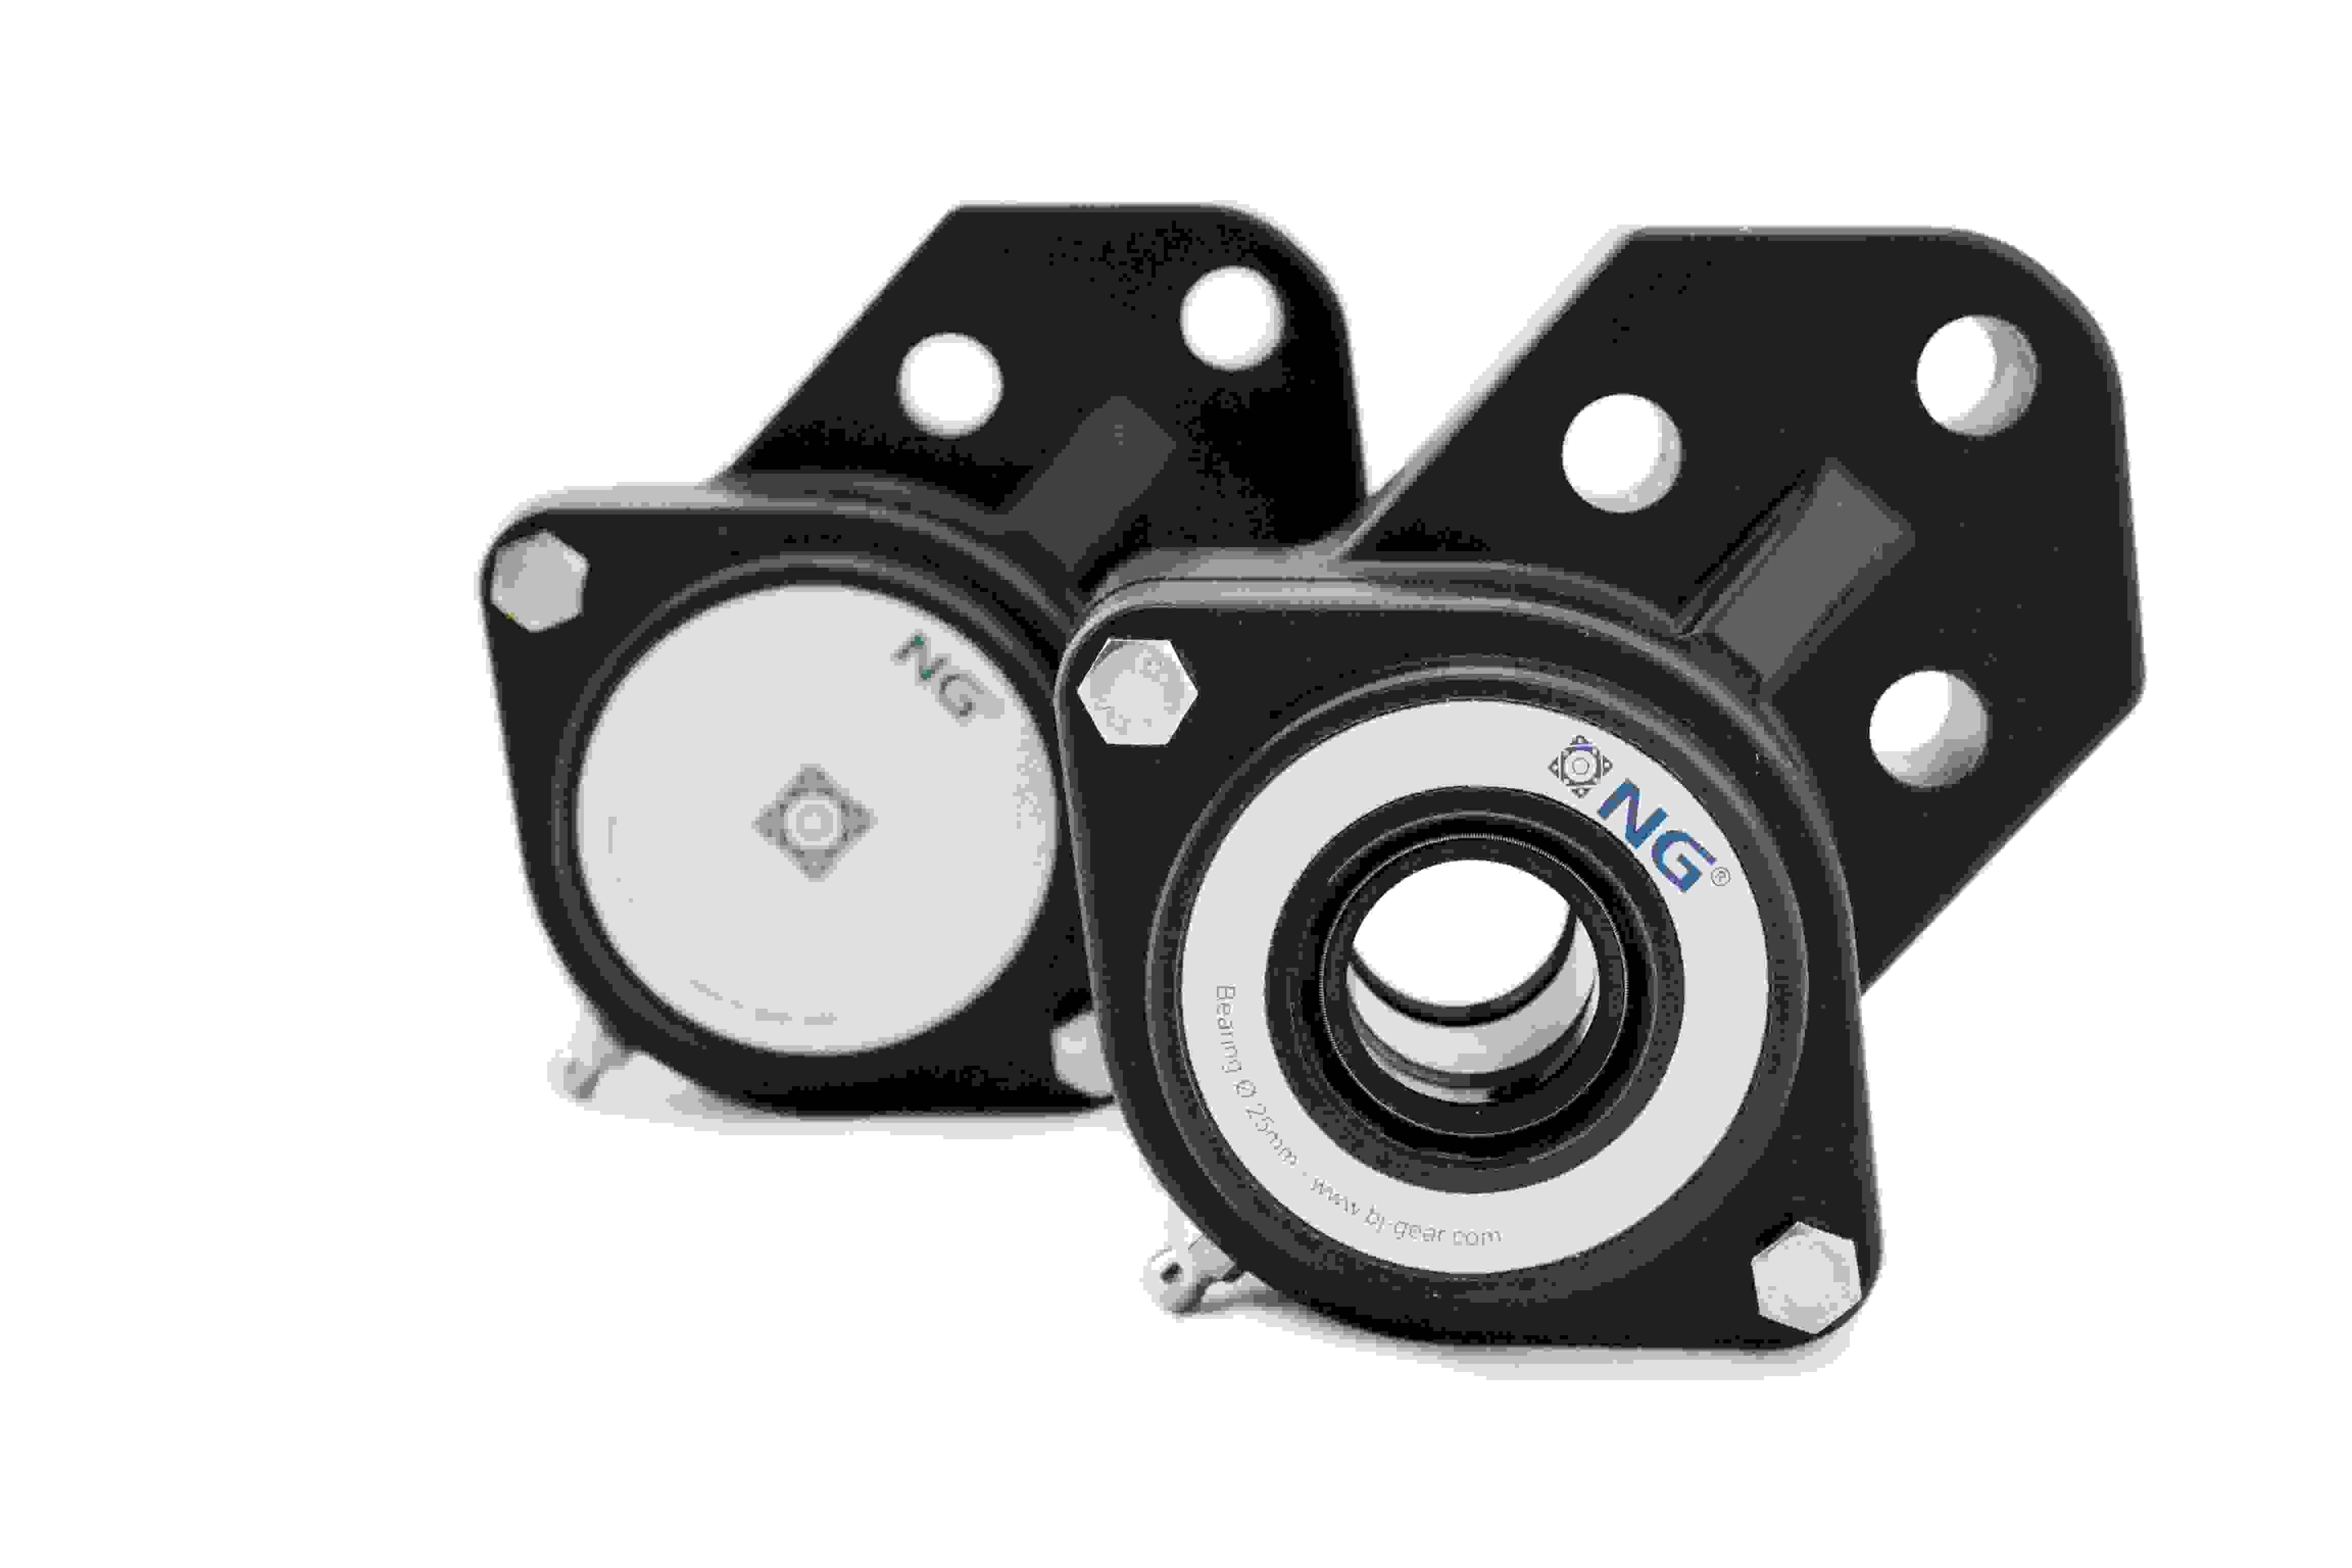 Two F3 3-bolt flange bearings with open and closed covers on transparent background